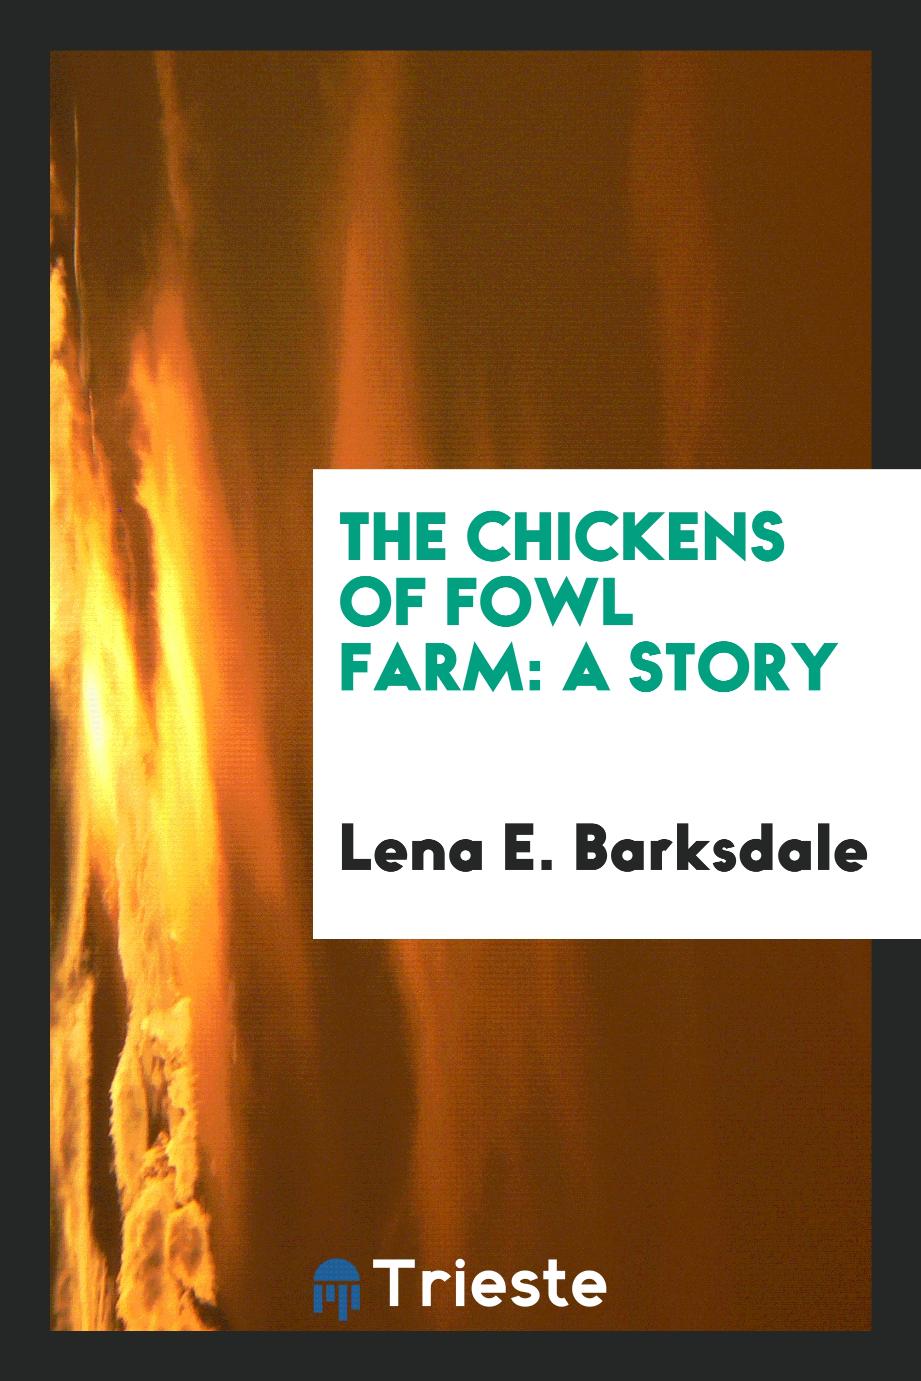 The Chickens of Fowl Farm: A Story